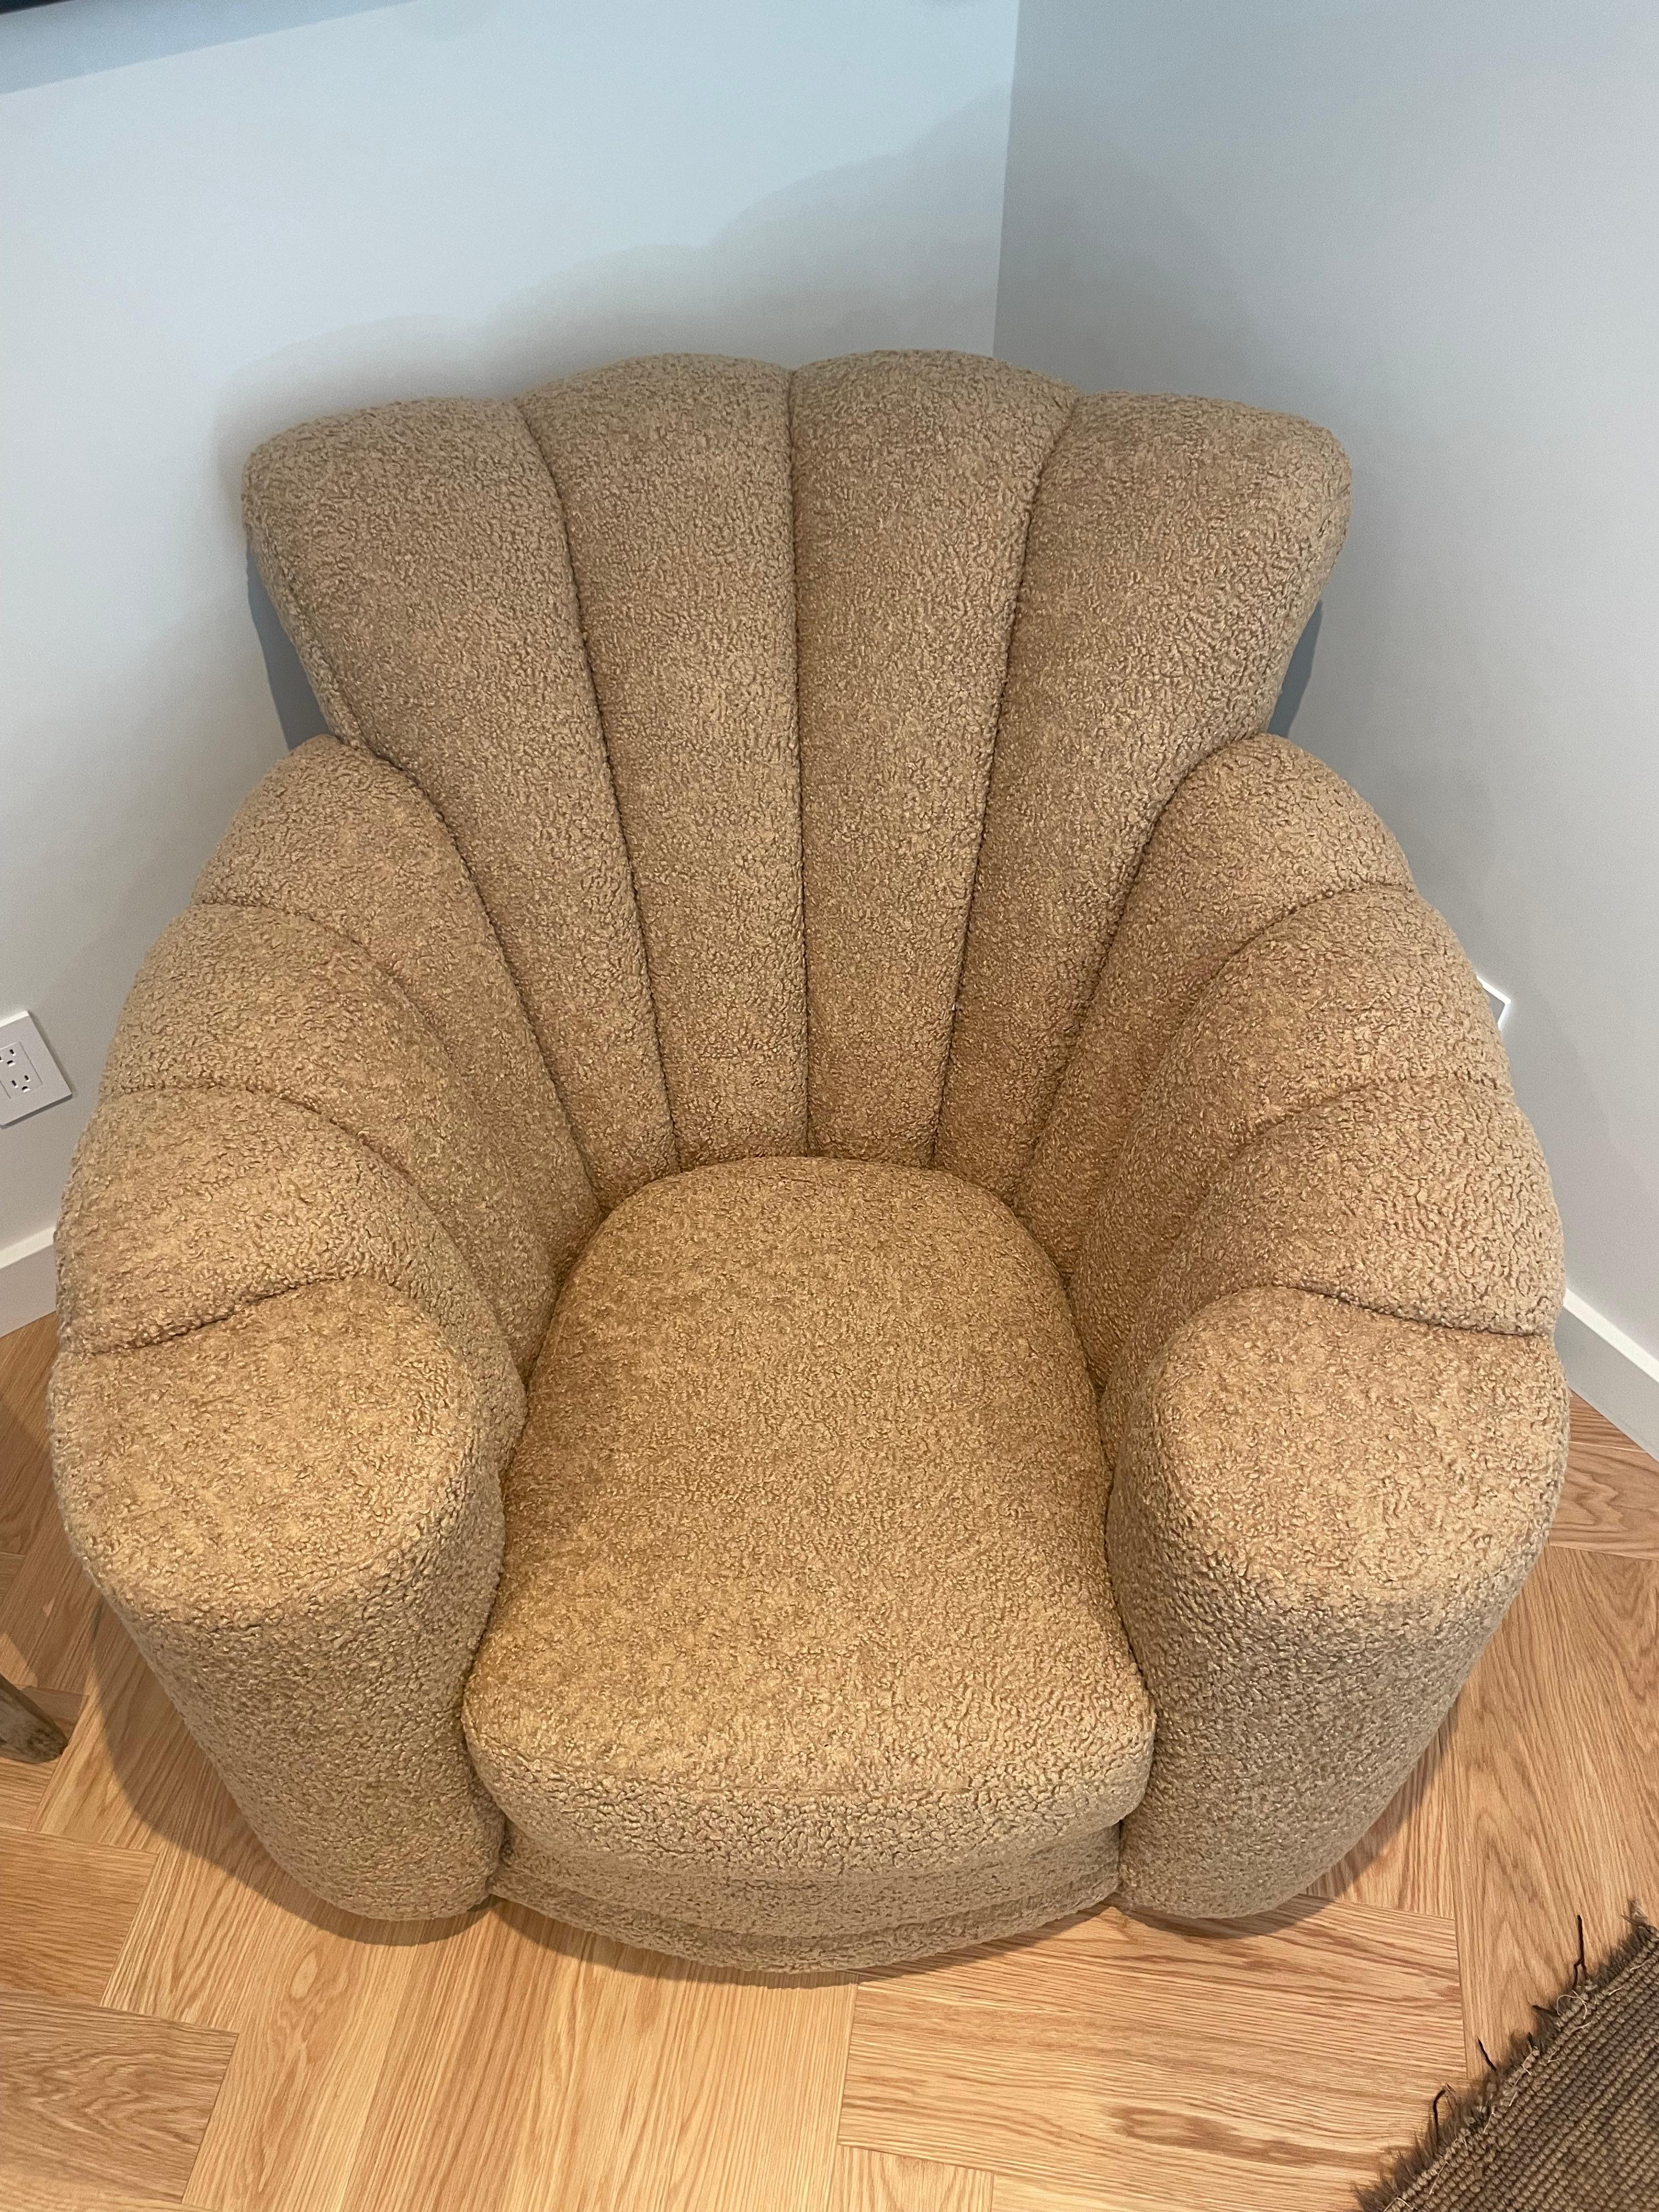 Monumental Oversize 1920 Deco Club Chair in Toffee-toned Boucle In Excellent Condition For Sale In West Hollywood, CA